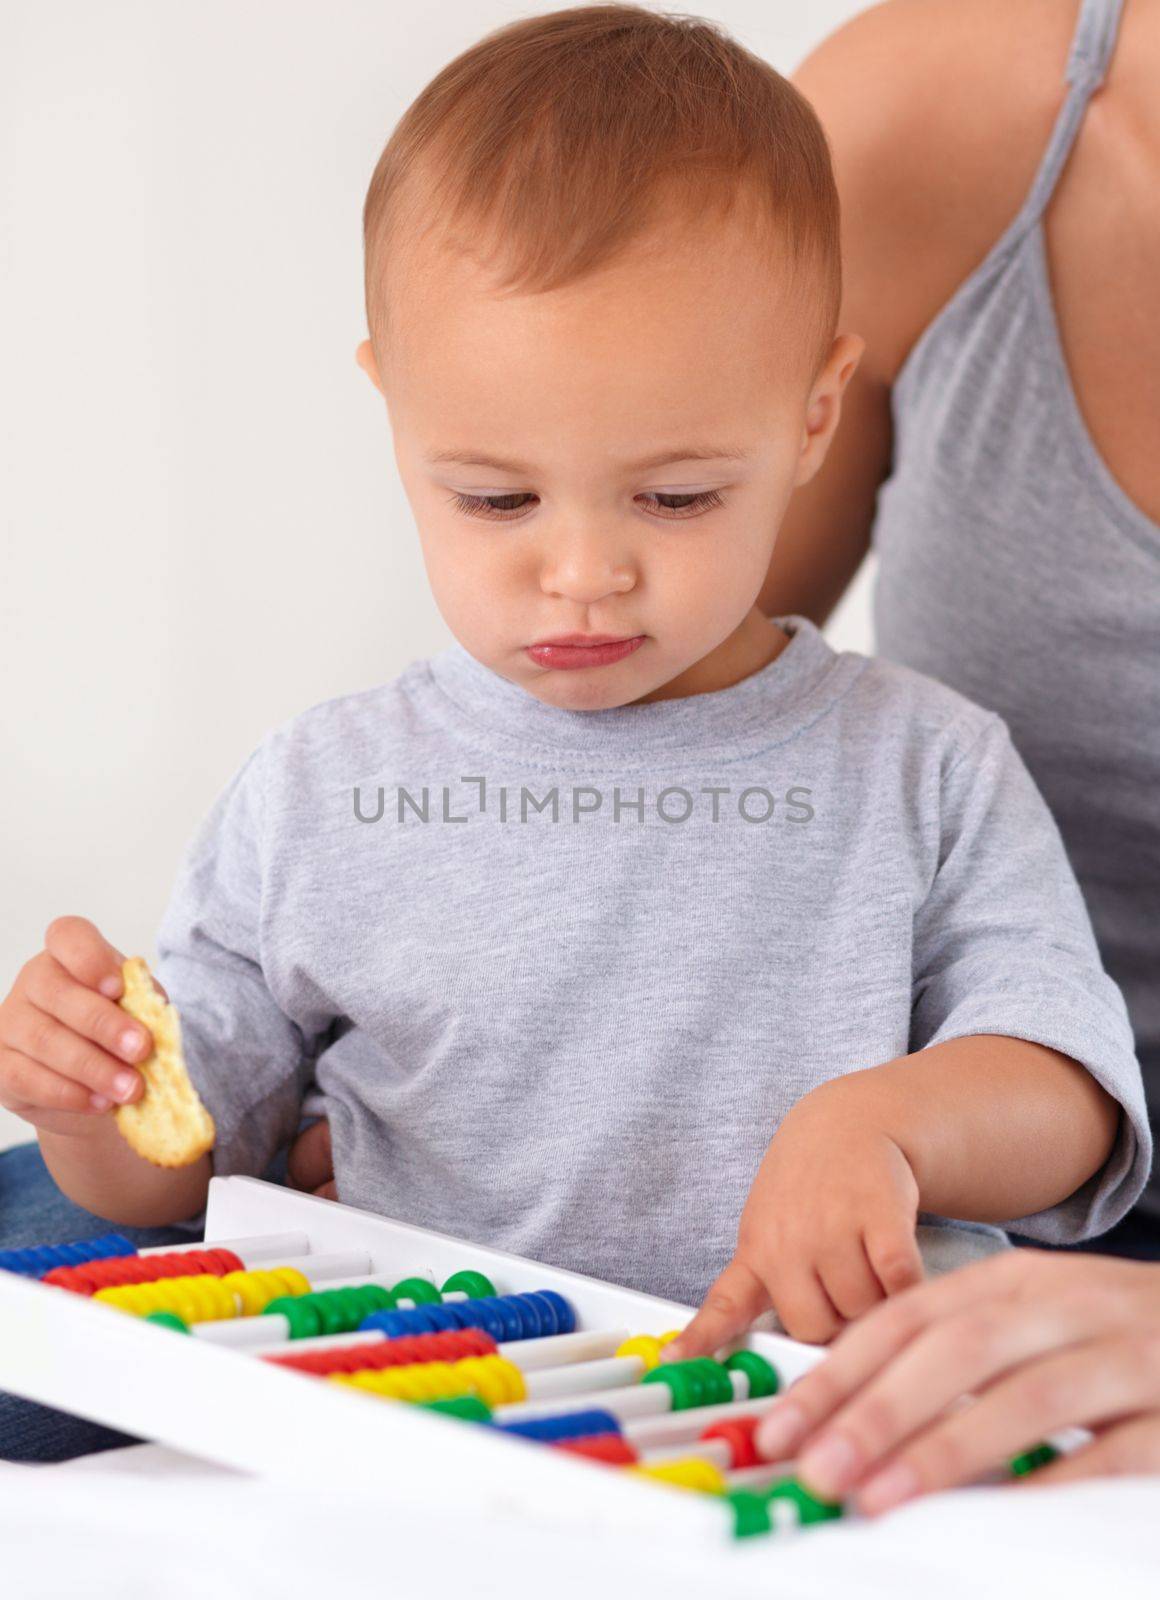 Learning with mommys help. A toddler boy playing with an abacus and eating a cracker